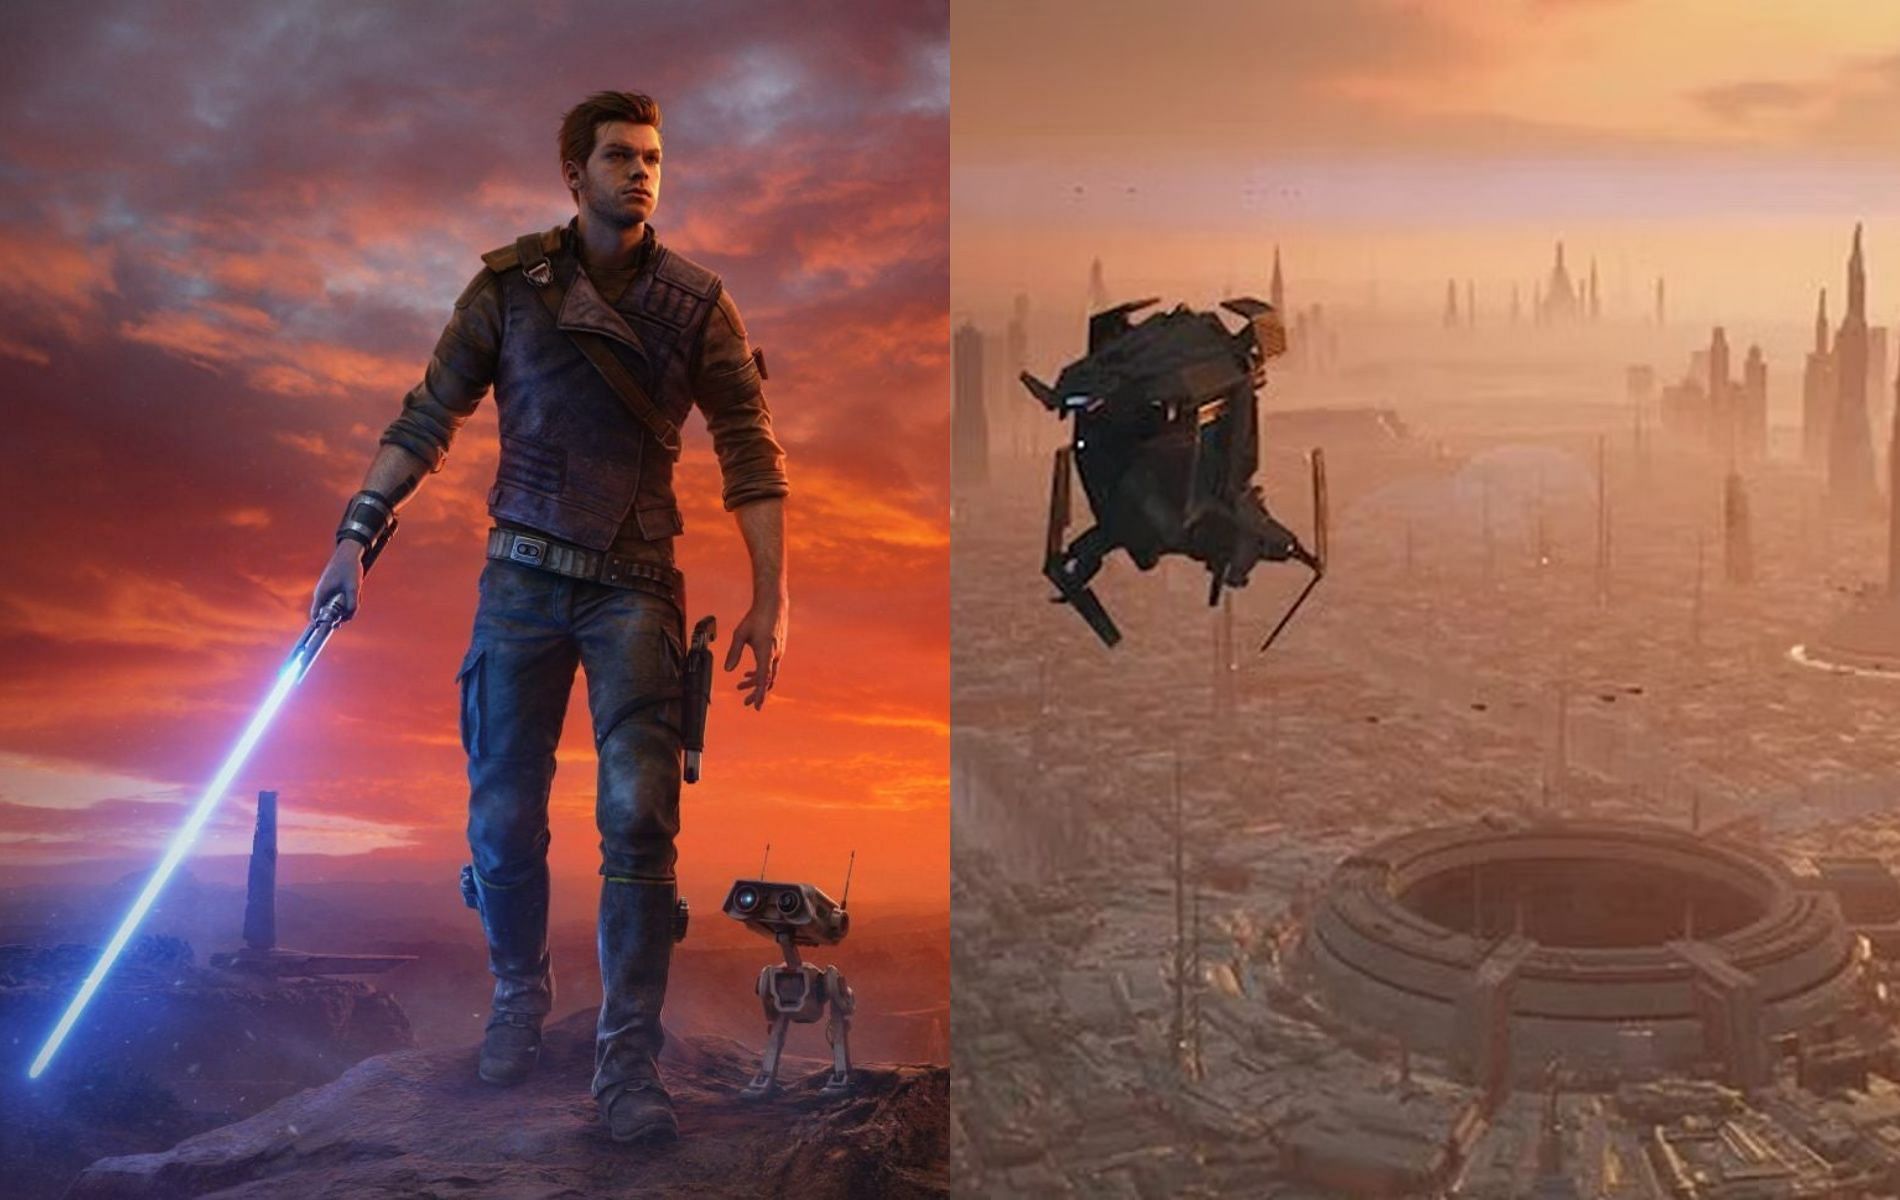 The massive city is one of the most striking locations in the game (Images via EA)